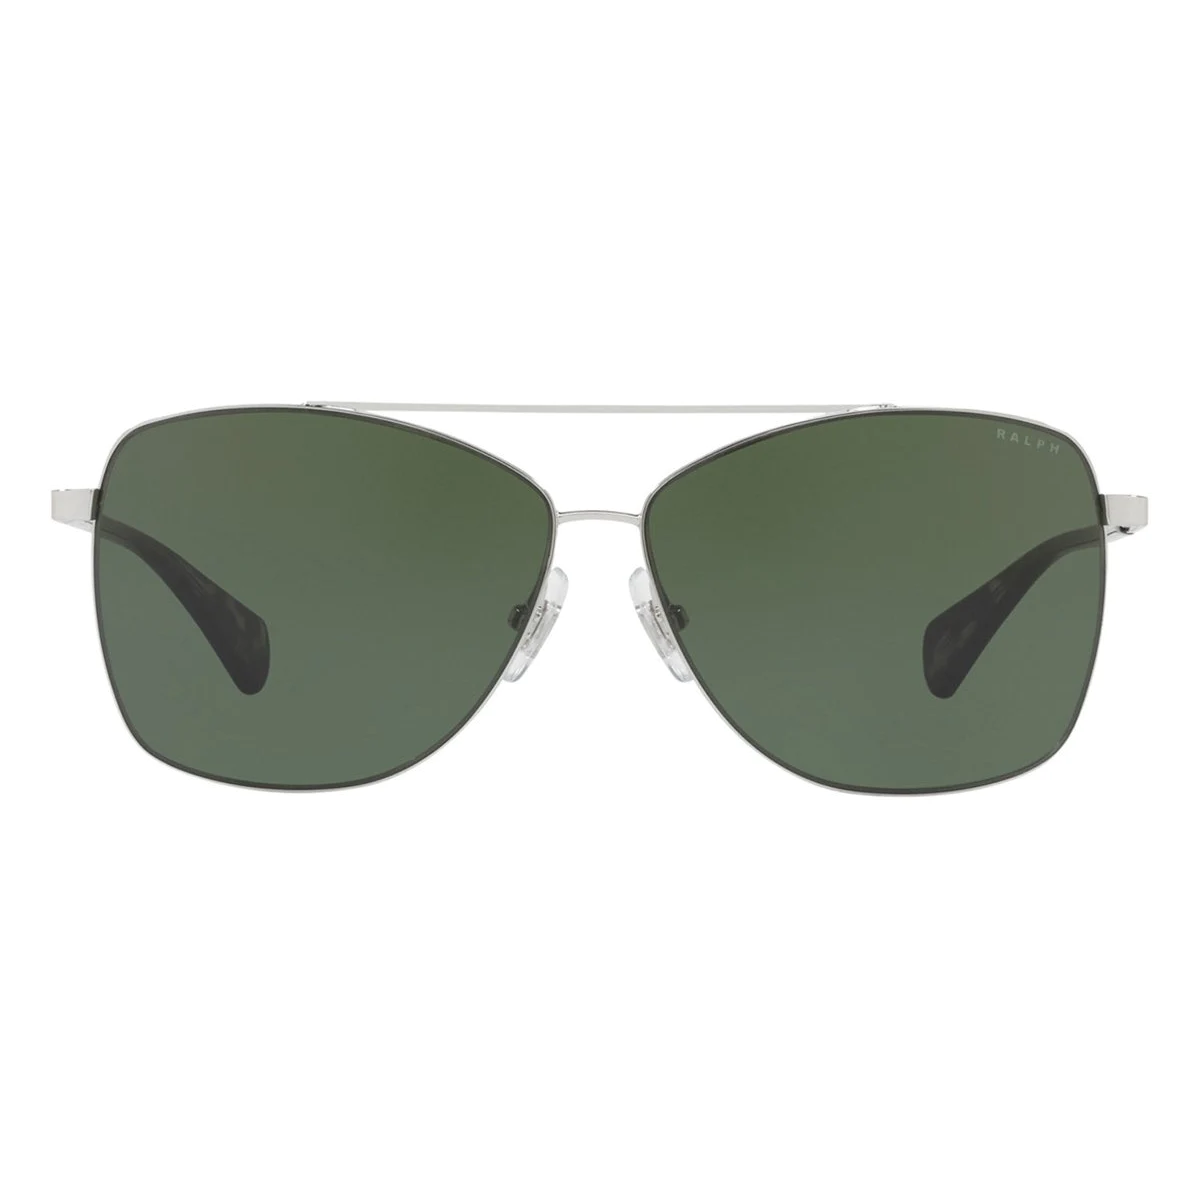 "Shop the Latest Ralph Lauren 4121 Aviator Sunglasses for Women at Optorium. Metal frames, green lenses. Fashionable and functional. Silver & black color combo. Upgrade your eyewear collection with Ralph Lauren 4121 sunglasses for women at Optorium."